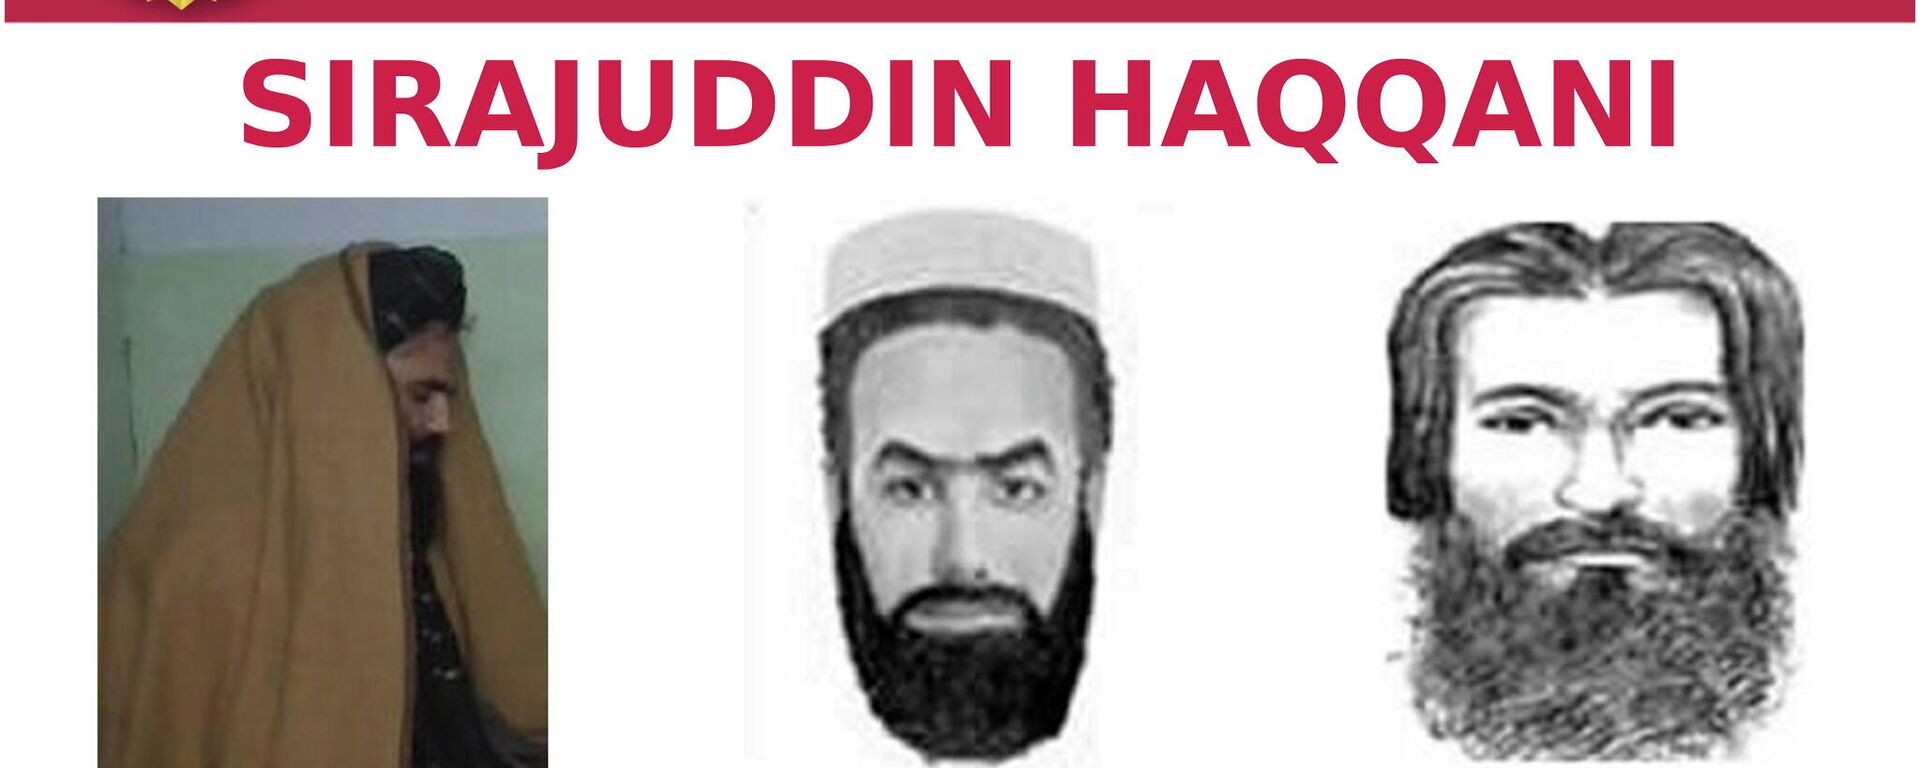 The 'Seeking Information' poster issued by the U.S. Federal Bureau of Investigation for Sirajuddin Haqqani, who is Afghanistan's newly appointed acting interior minister - Sputnik International, 1920, 08.09.2021